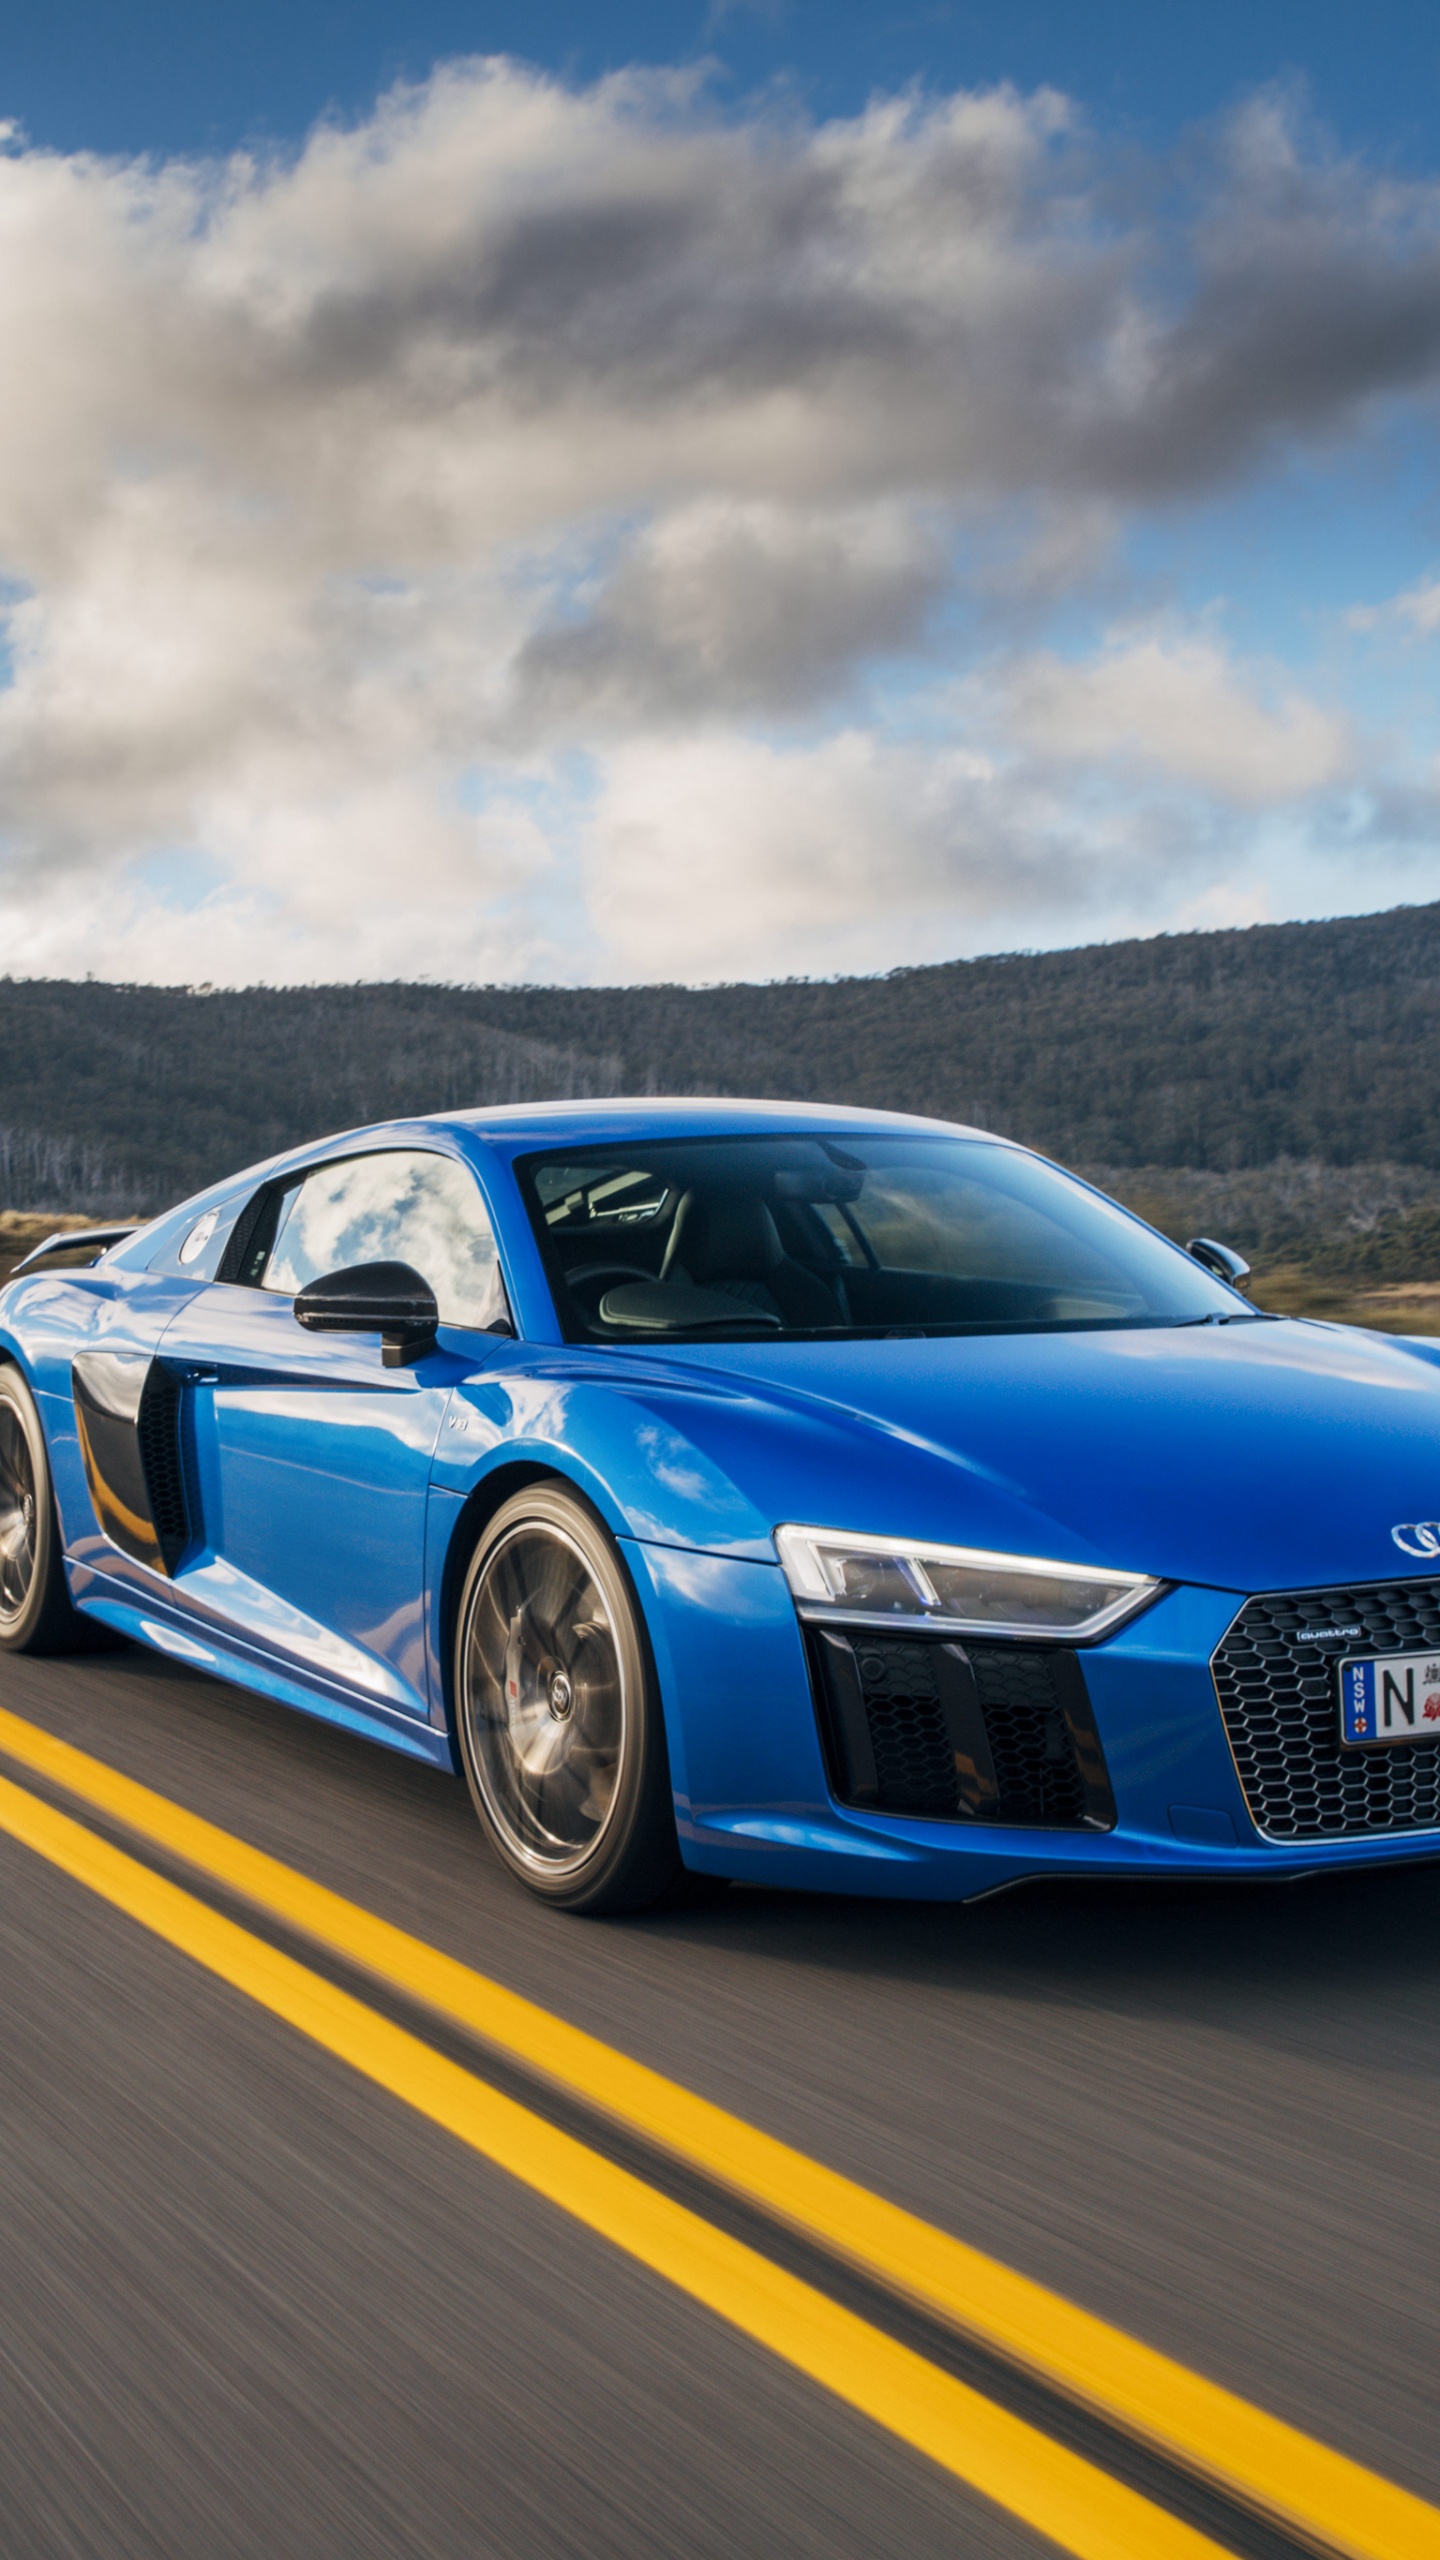 Blue Audi Coupe on Road During Daytime. Wallpaper in 1440x2560 Resolution